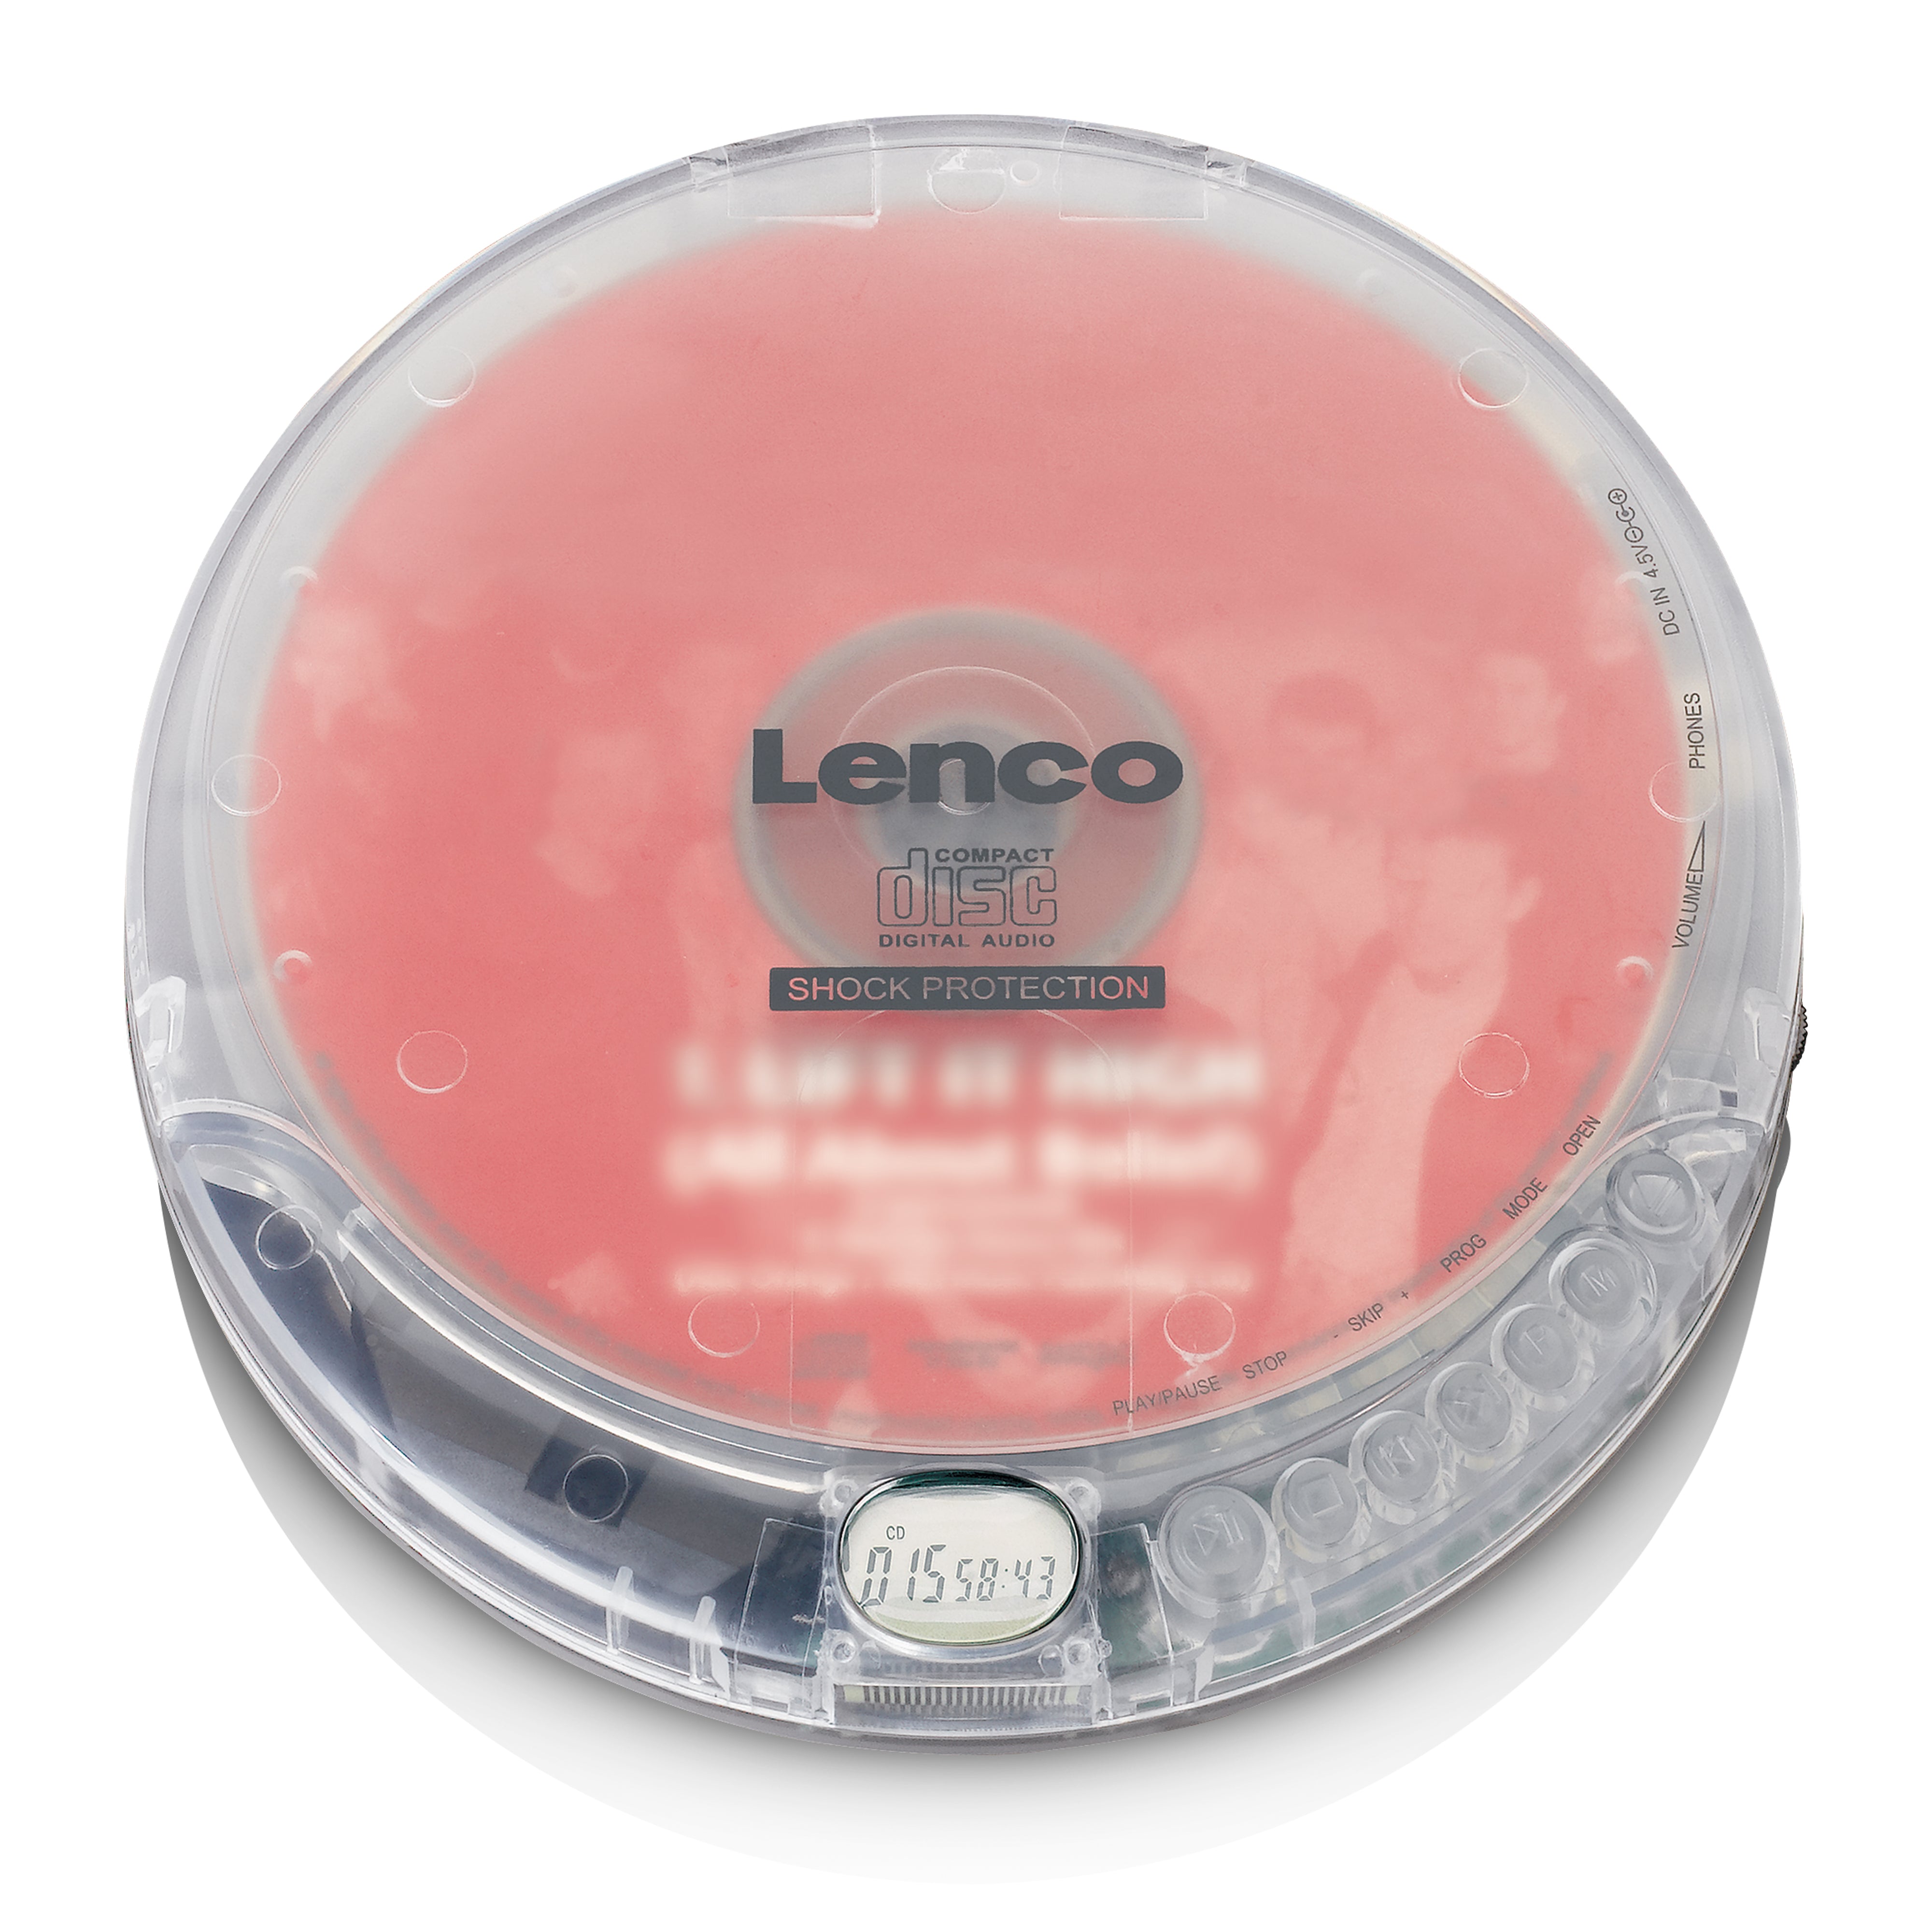 LENCO CD-202TR - Portable CD-player with anti-shock - Transparent